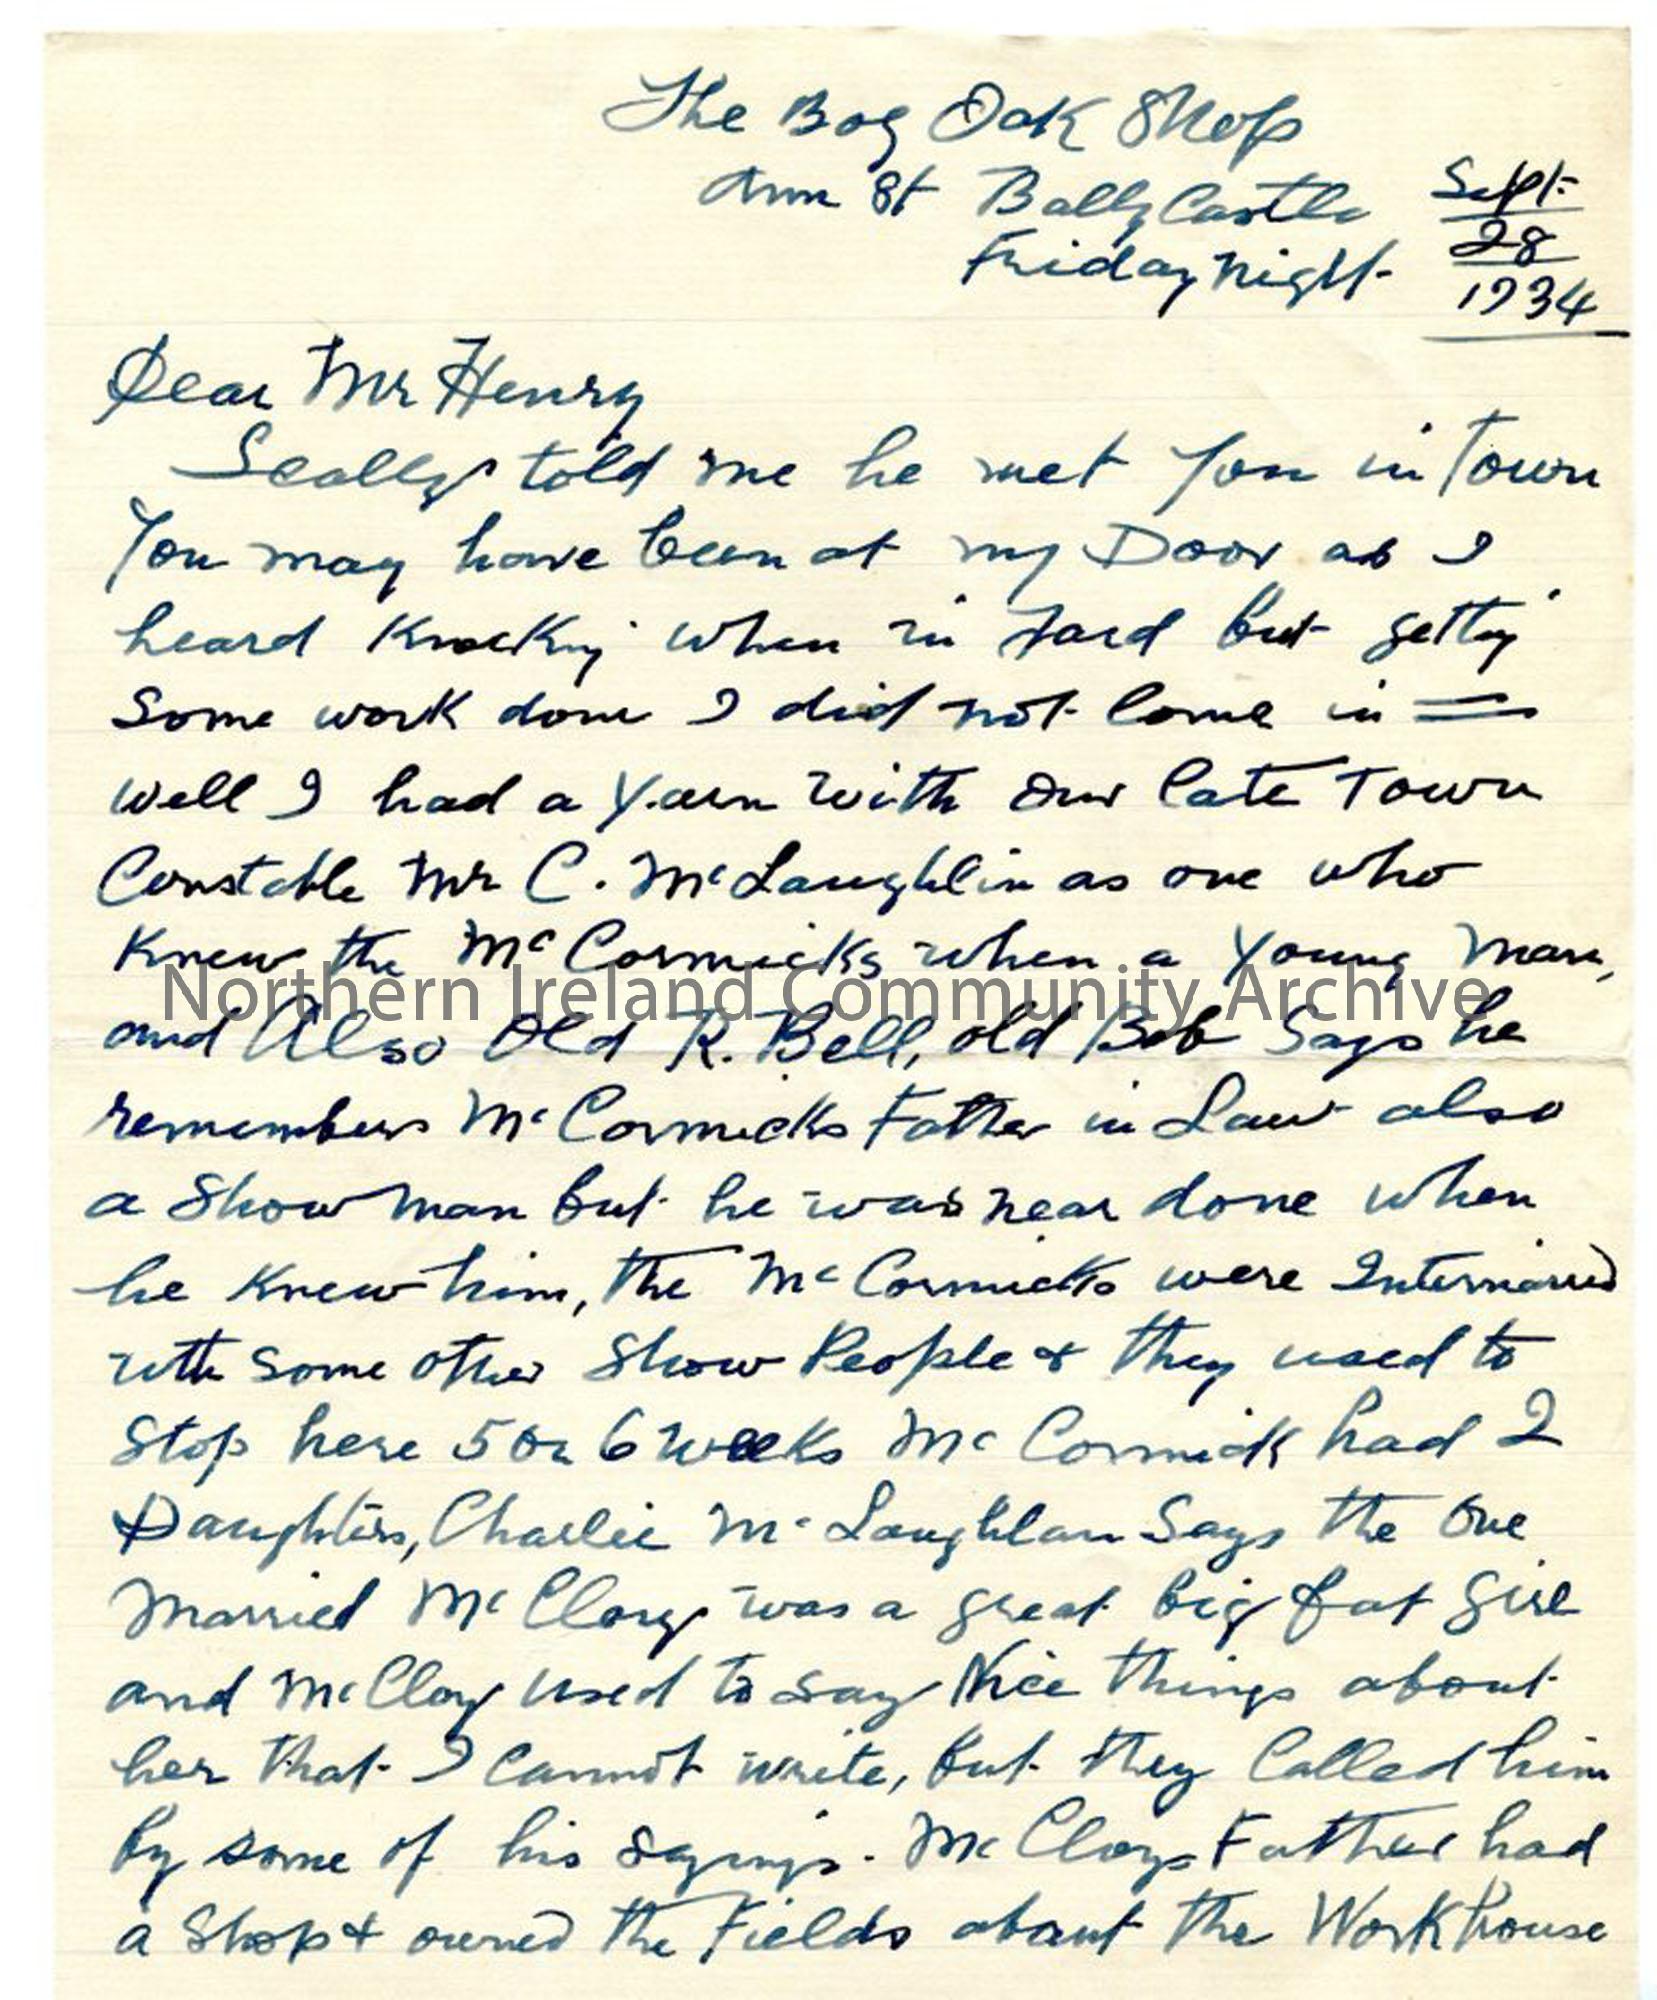 Letter, page 1 of 2, from John MacAulay, 28.9.1934